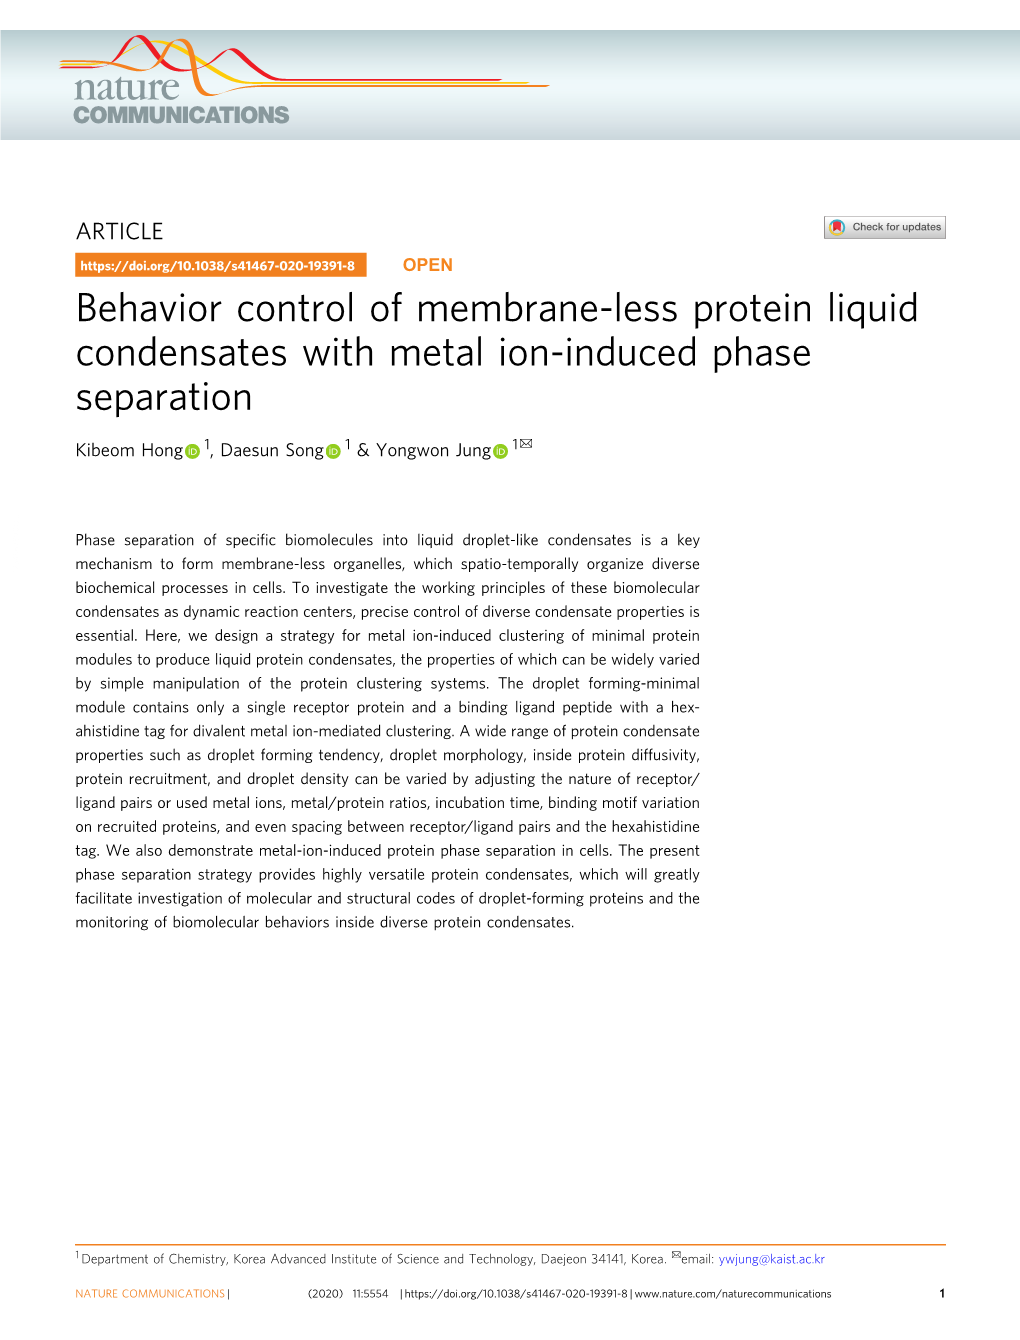 Behavior Control of Membrane-Less Protein Liquid Condensates with Metal Ion-Induced Phase Separation ✉ Kibeom Hong 1, Daesun Song 1 & Yongwon Jung 1